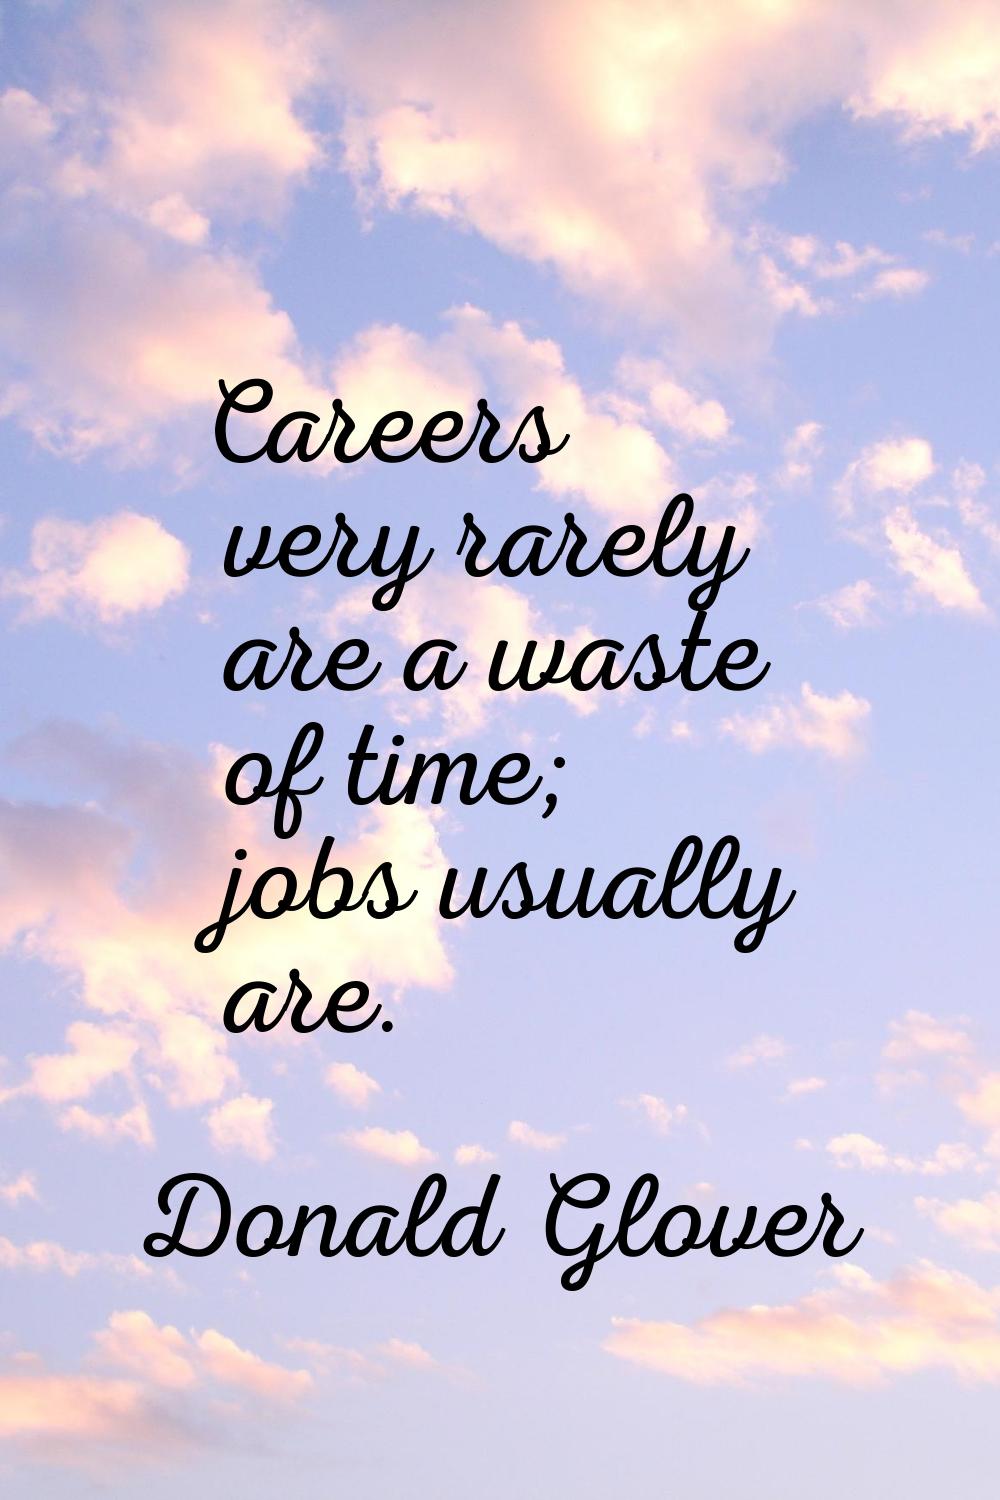 Careers very rarely are a waste of time; jobs usually are.